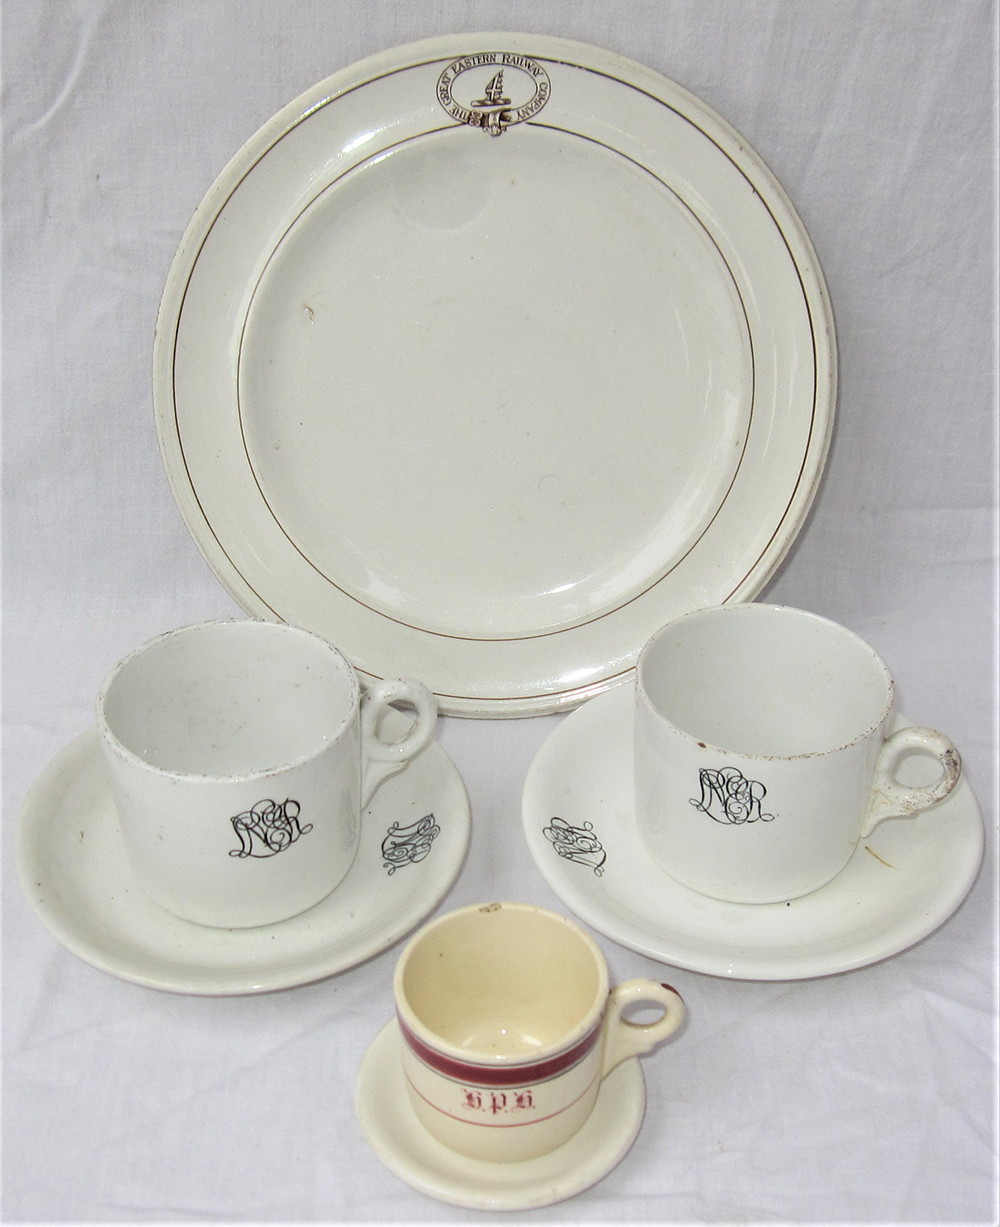 A collection of GER and LNER tableware to include 2 x LNER matching cup and saucer. 1 x GER dinner